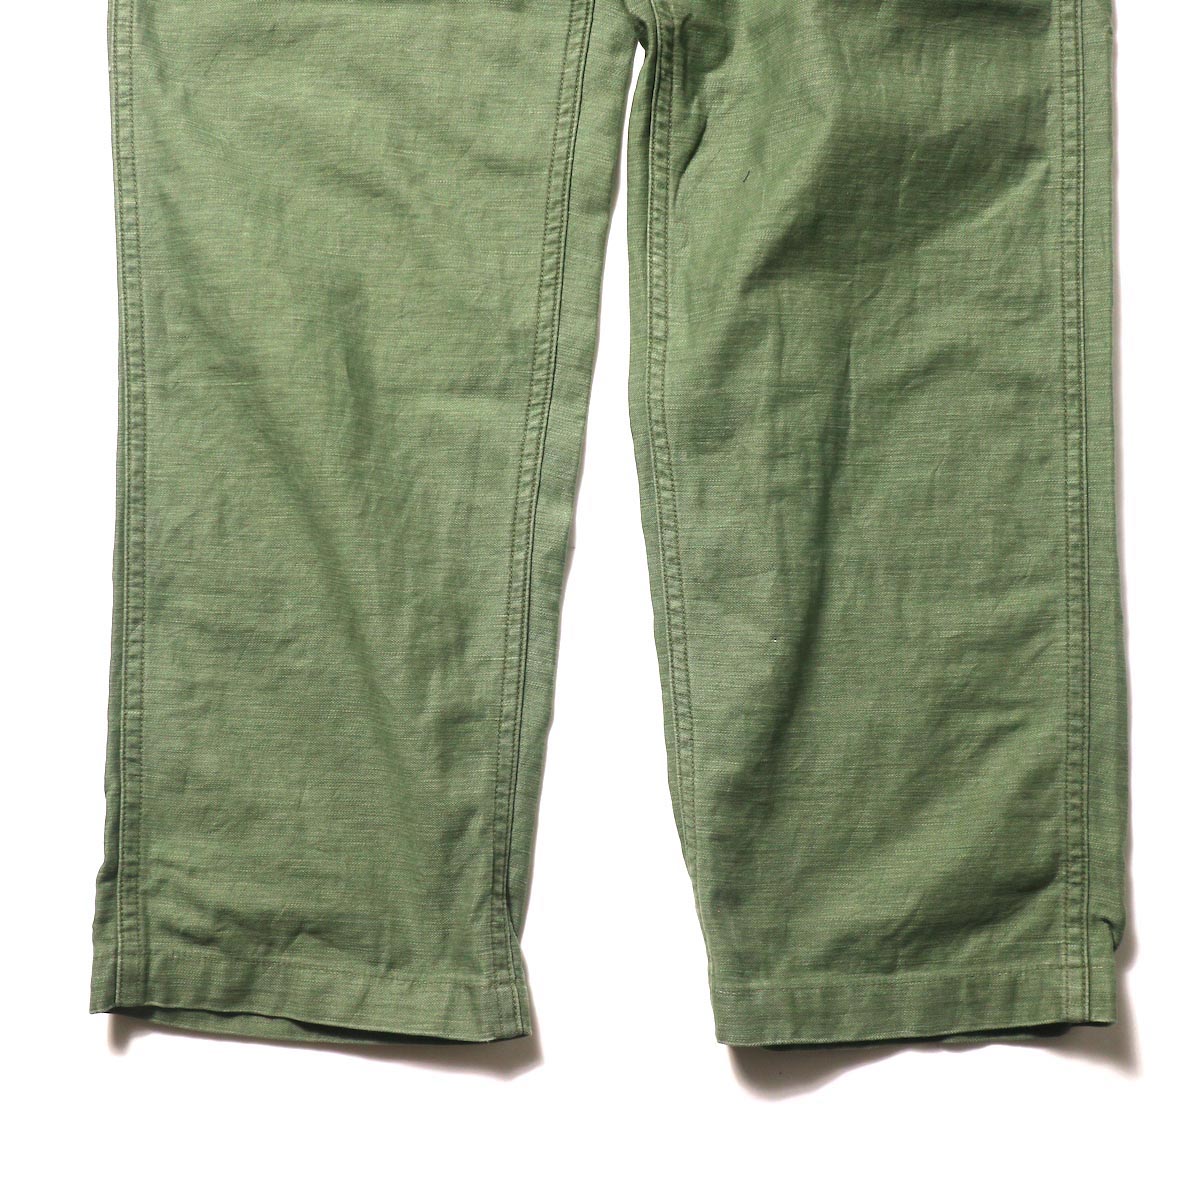 orSlow / US ARMY FATIGUE PANTS (Used Green)裾